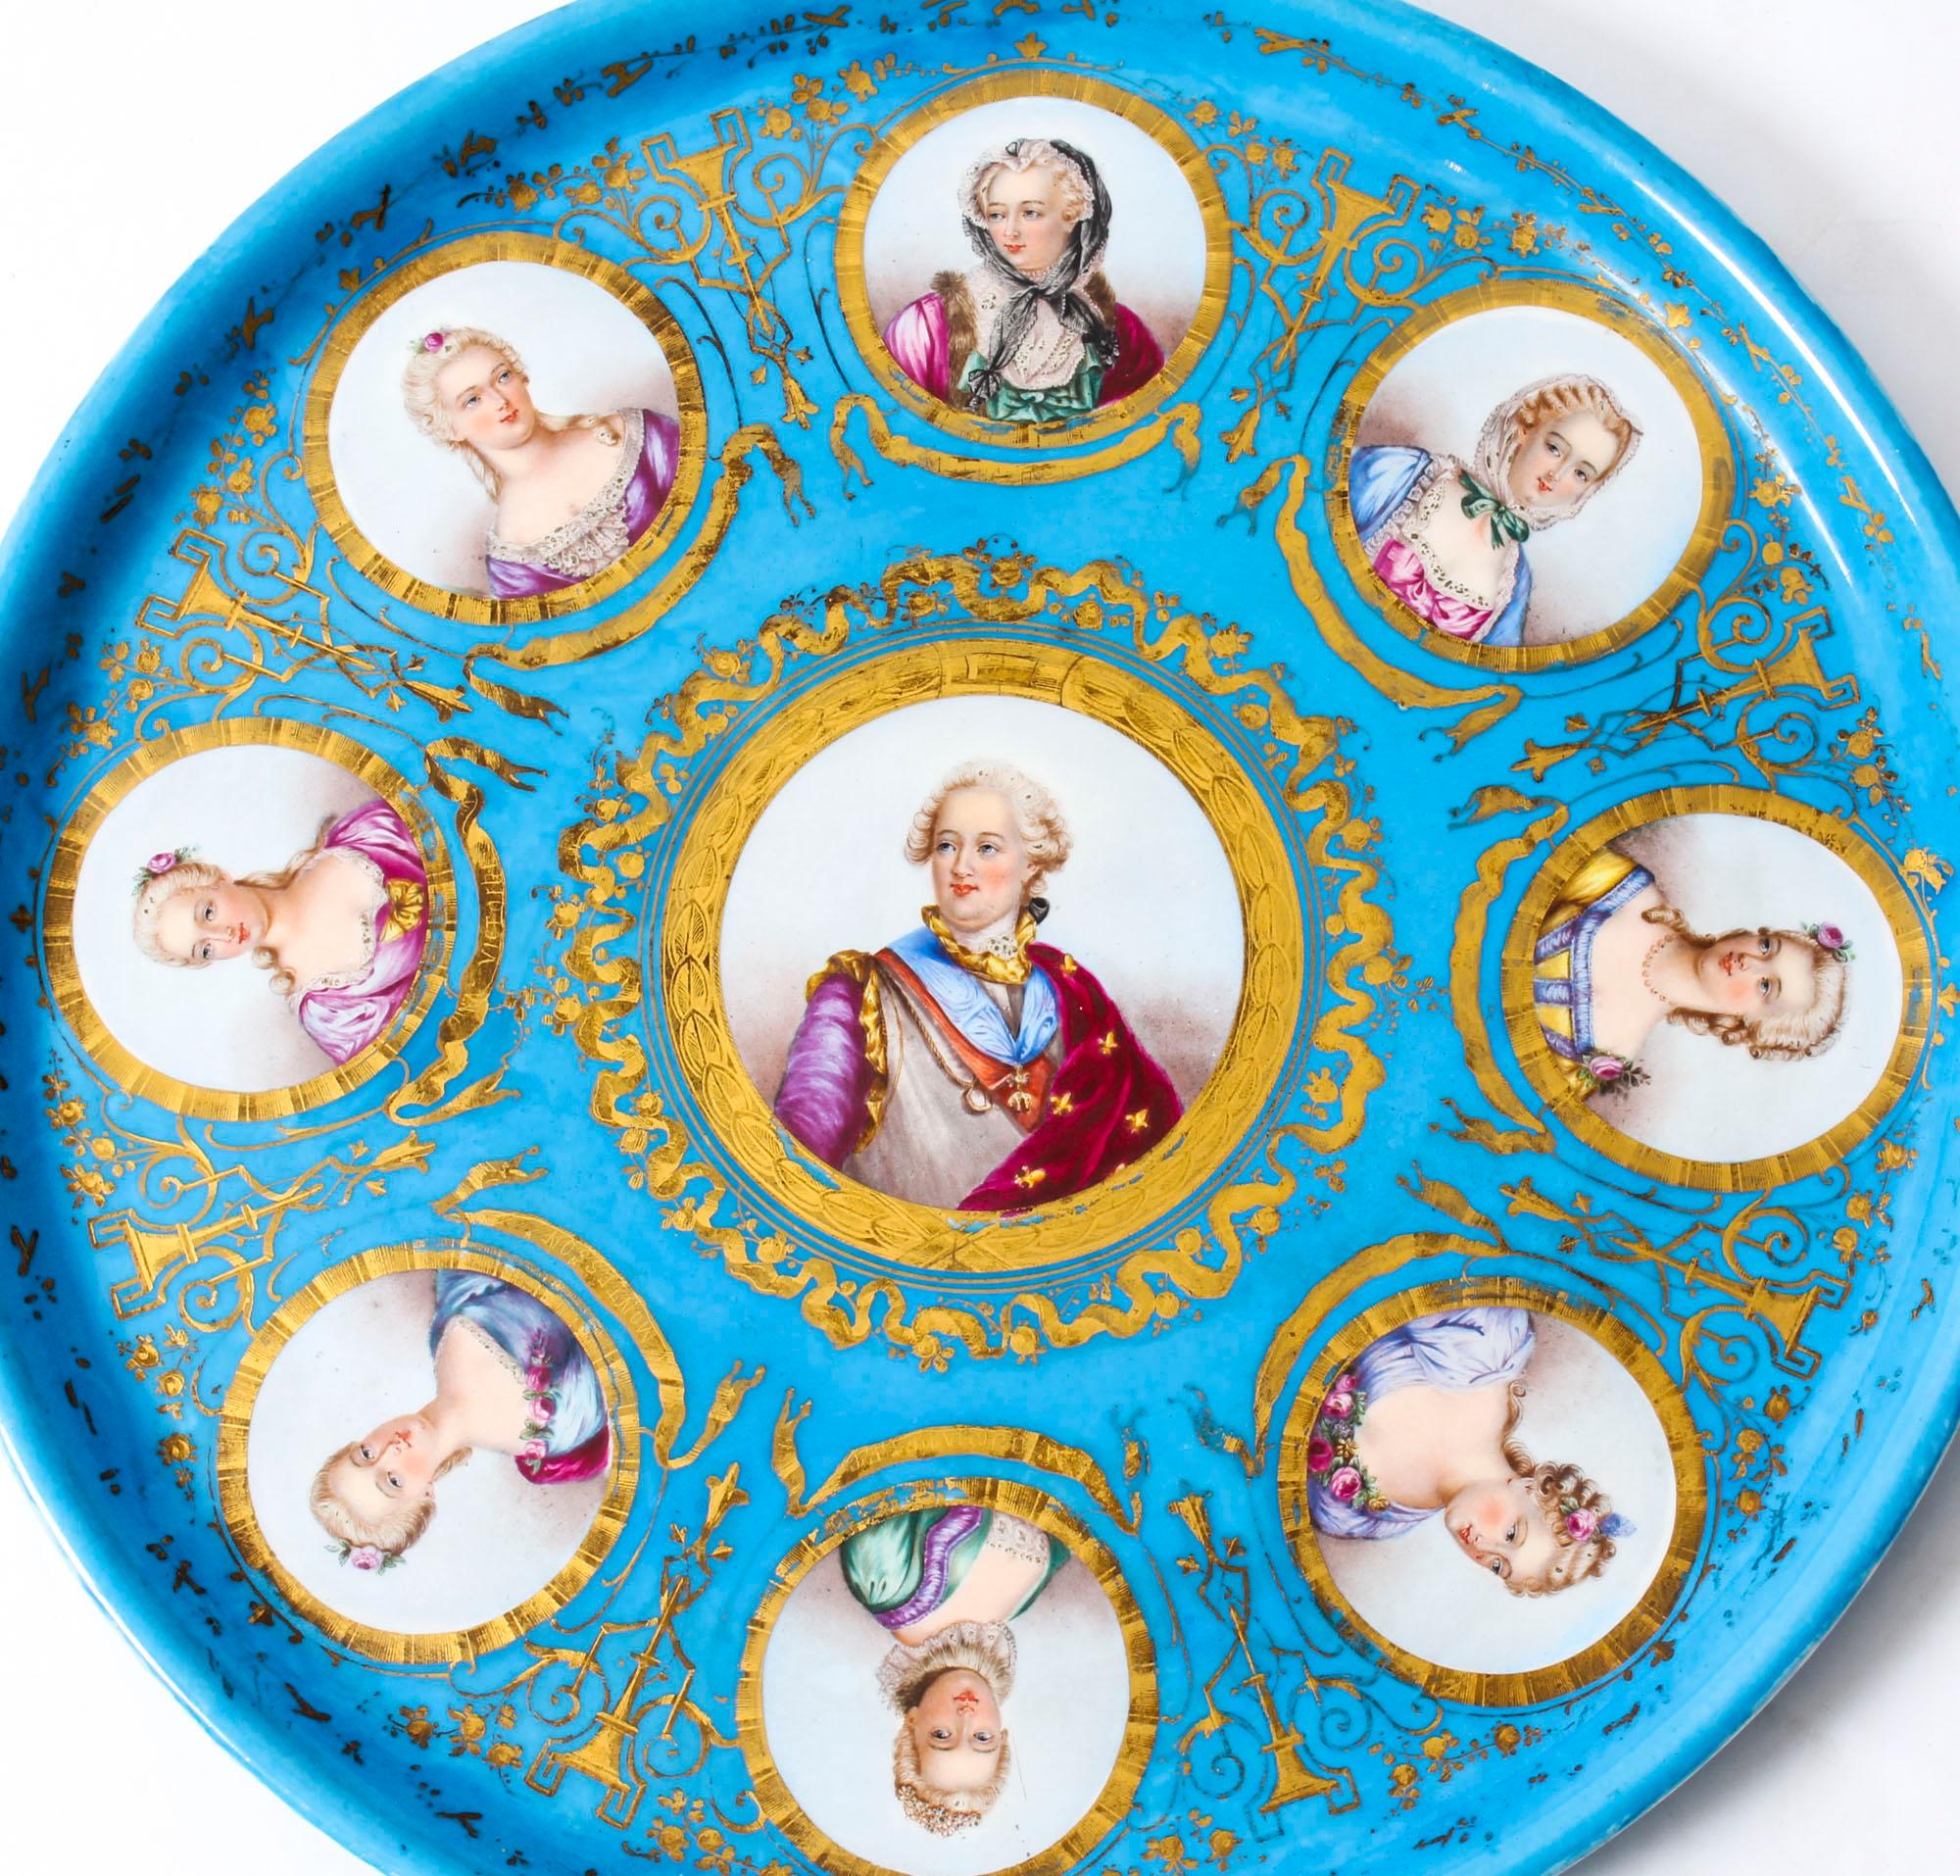 This is an important large decorative antique French ormolu-mounted Sèvres Porcelain charger featuring portaits of Louis XVI and important members of his court, the rear with underglaze blue factory Sevres mark, mid-19th century in date.
 
It has